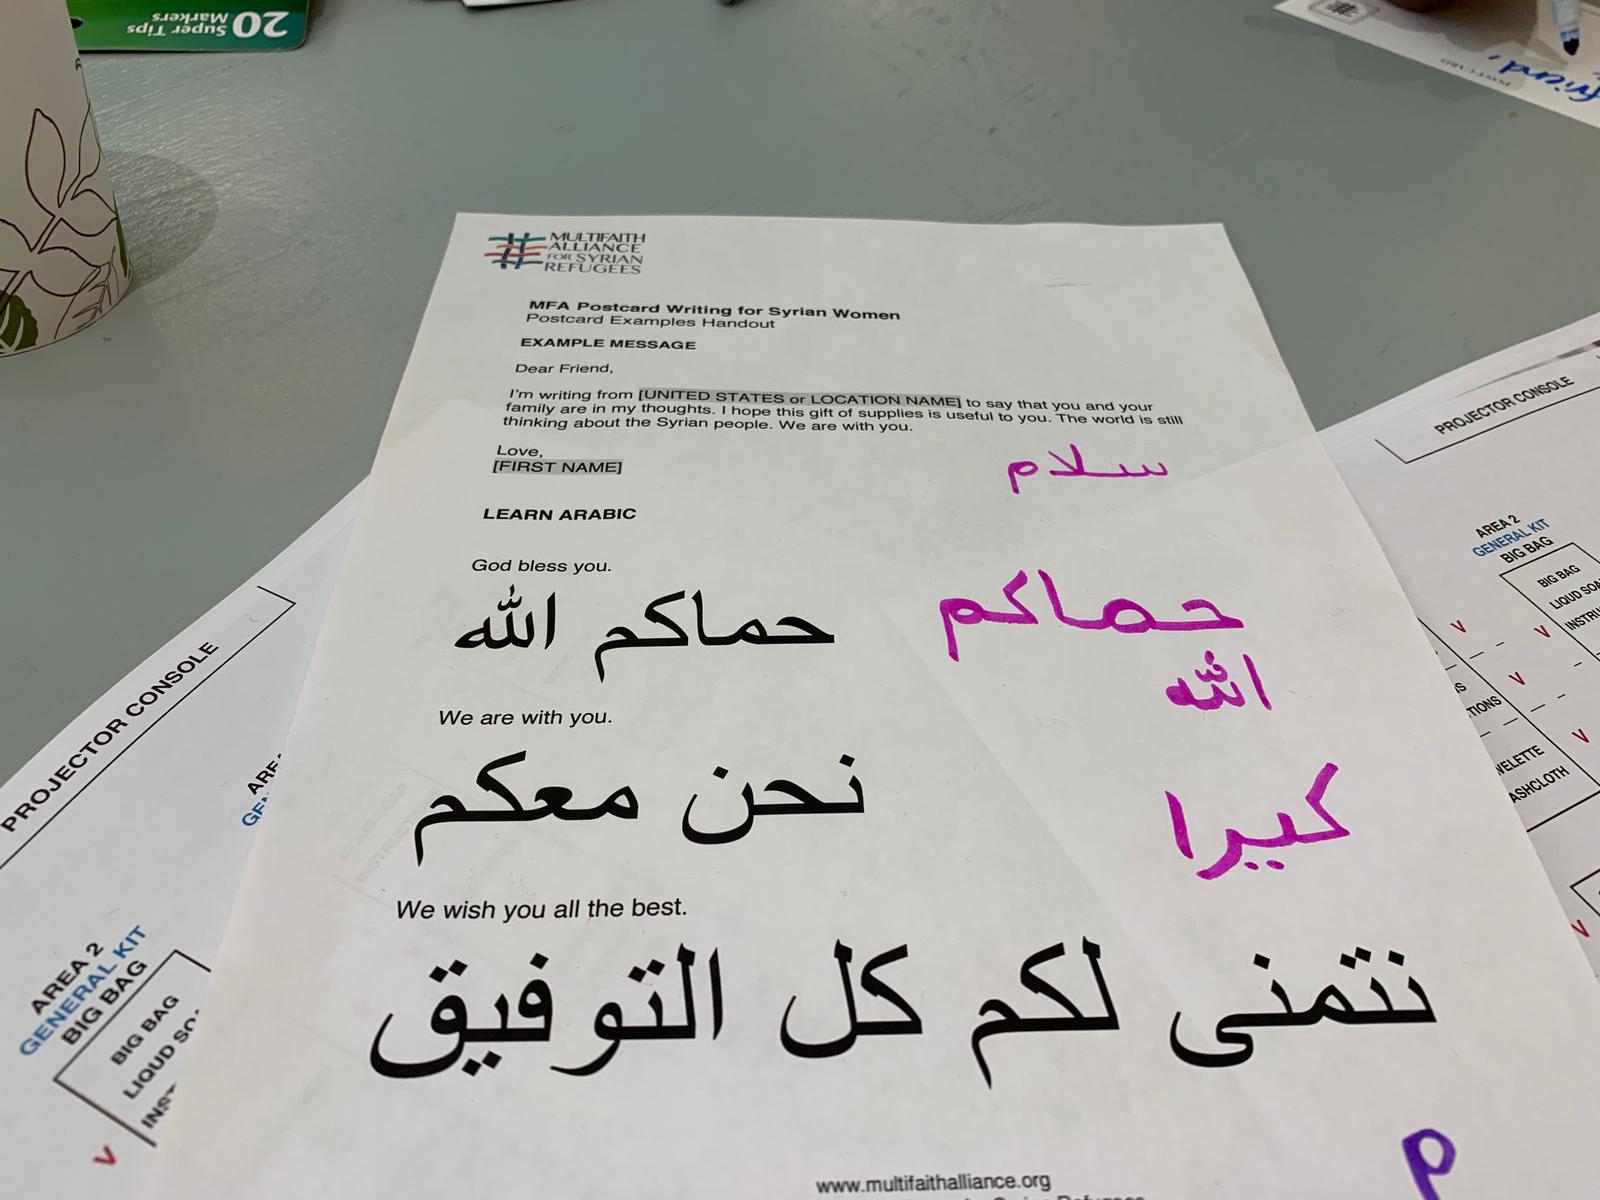 In Arabic and English: "God bless you." "We are with you." "We wish you all the best."